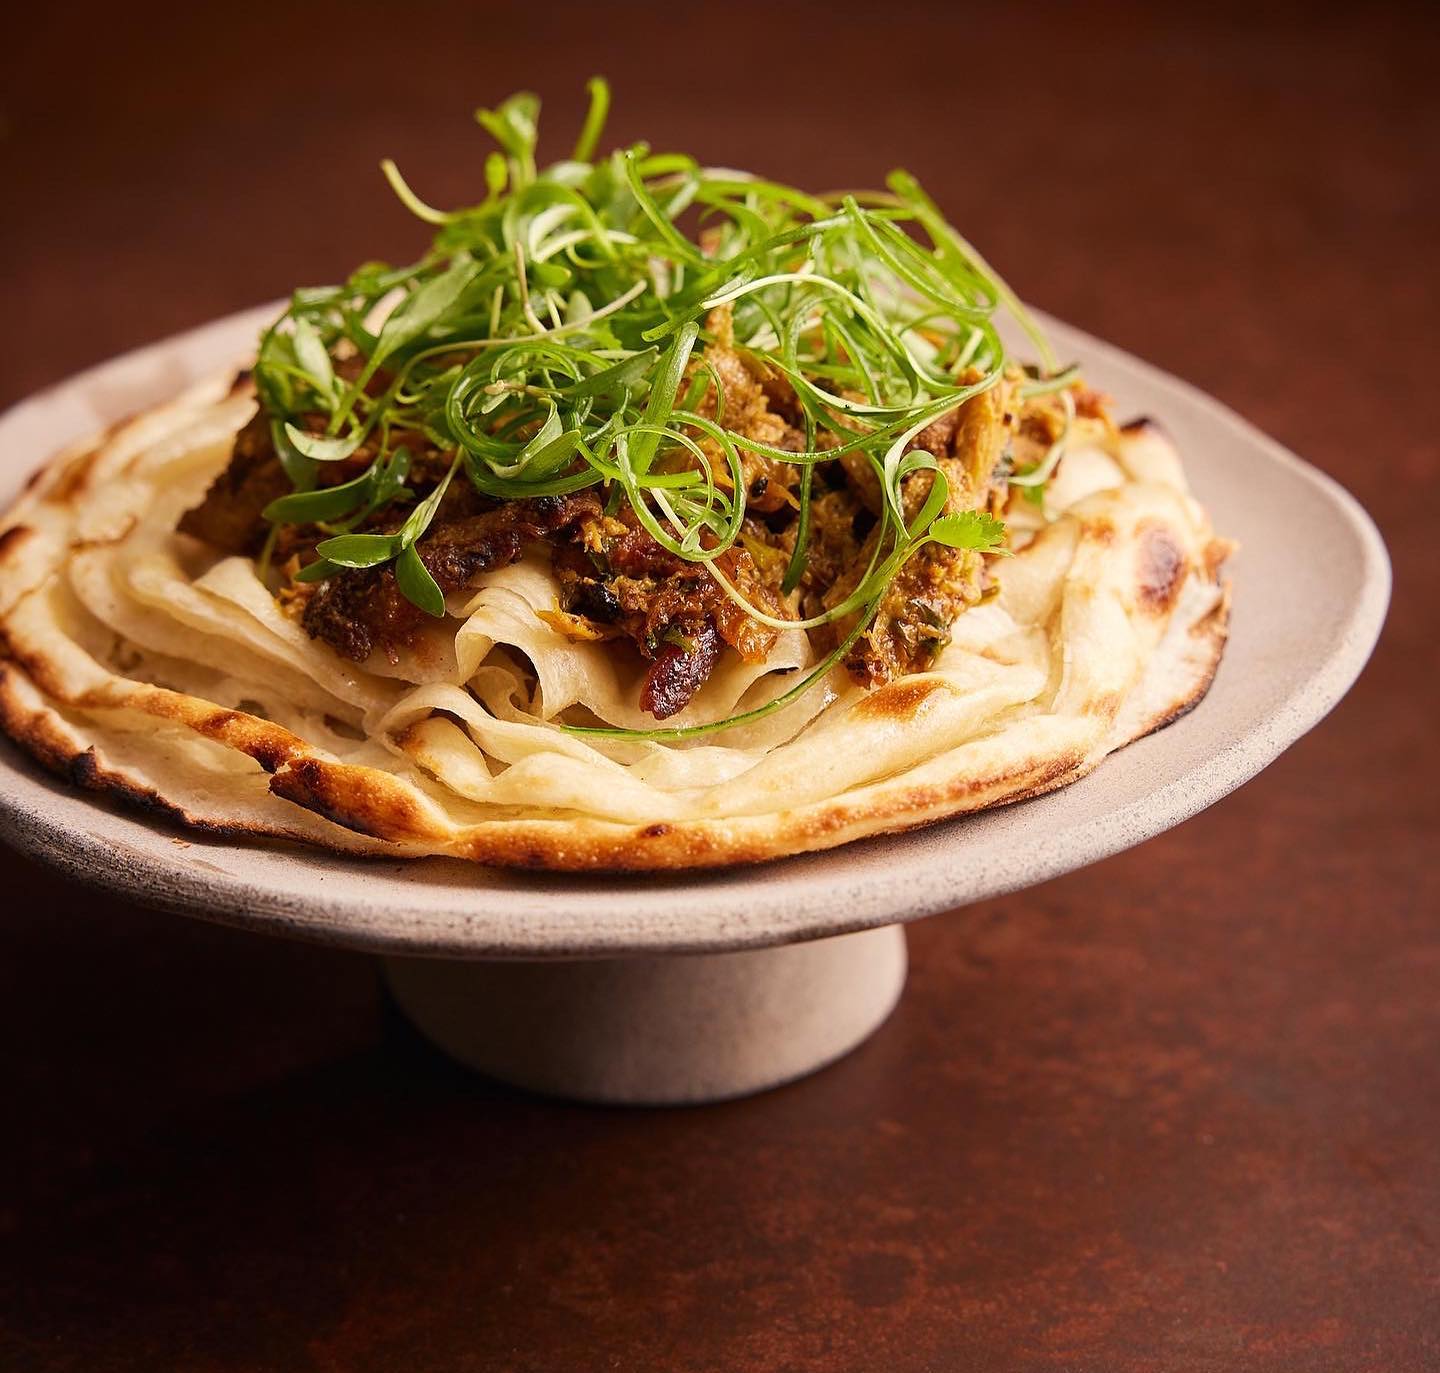 The lamb naan at KOL is beyond delicious.